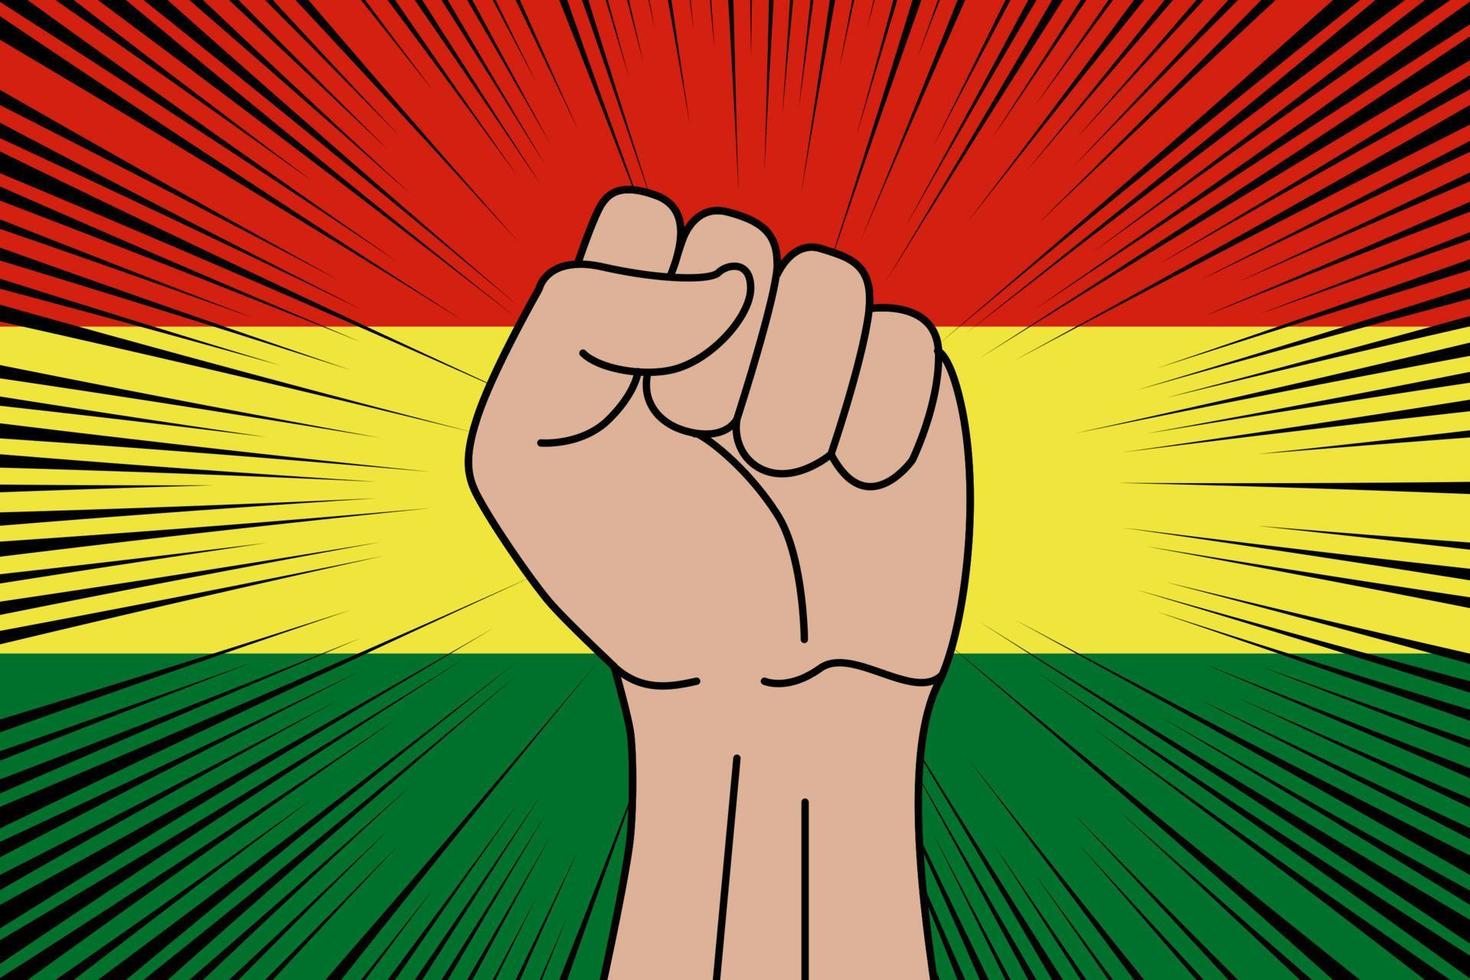 Human fist clenched symbol on flag of Bolivia vector